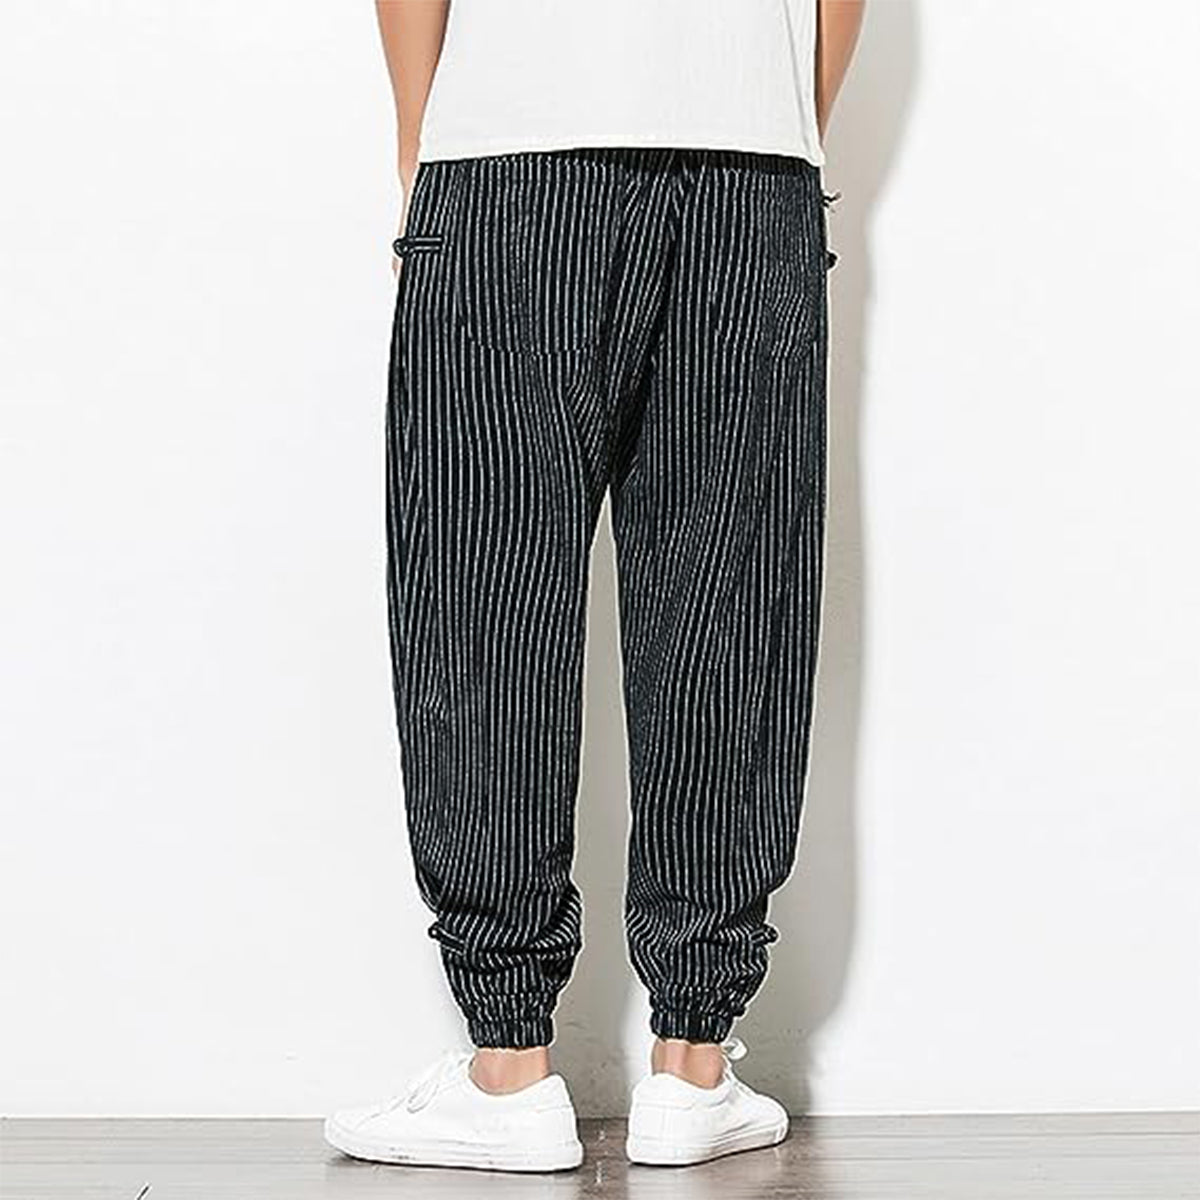 Buy Fashion Sutra Black & White Striped Palazzo Pants for Girls and Women  at Amazon.in